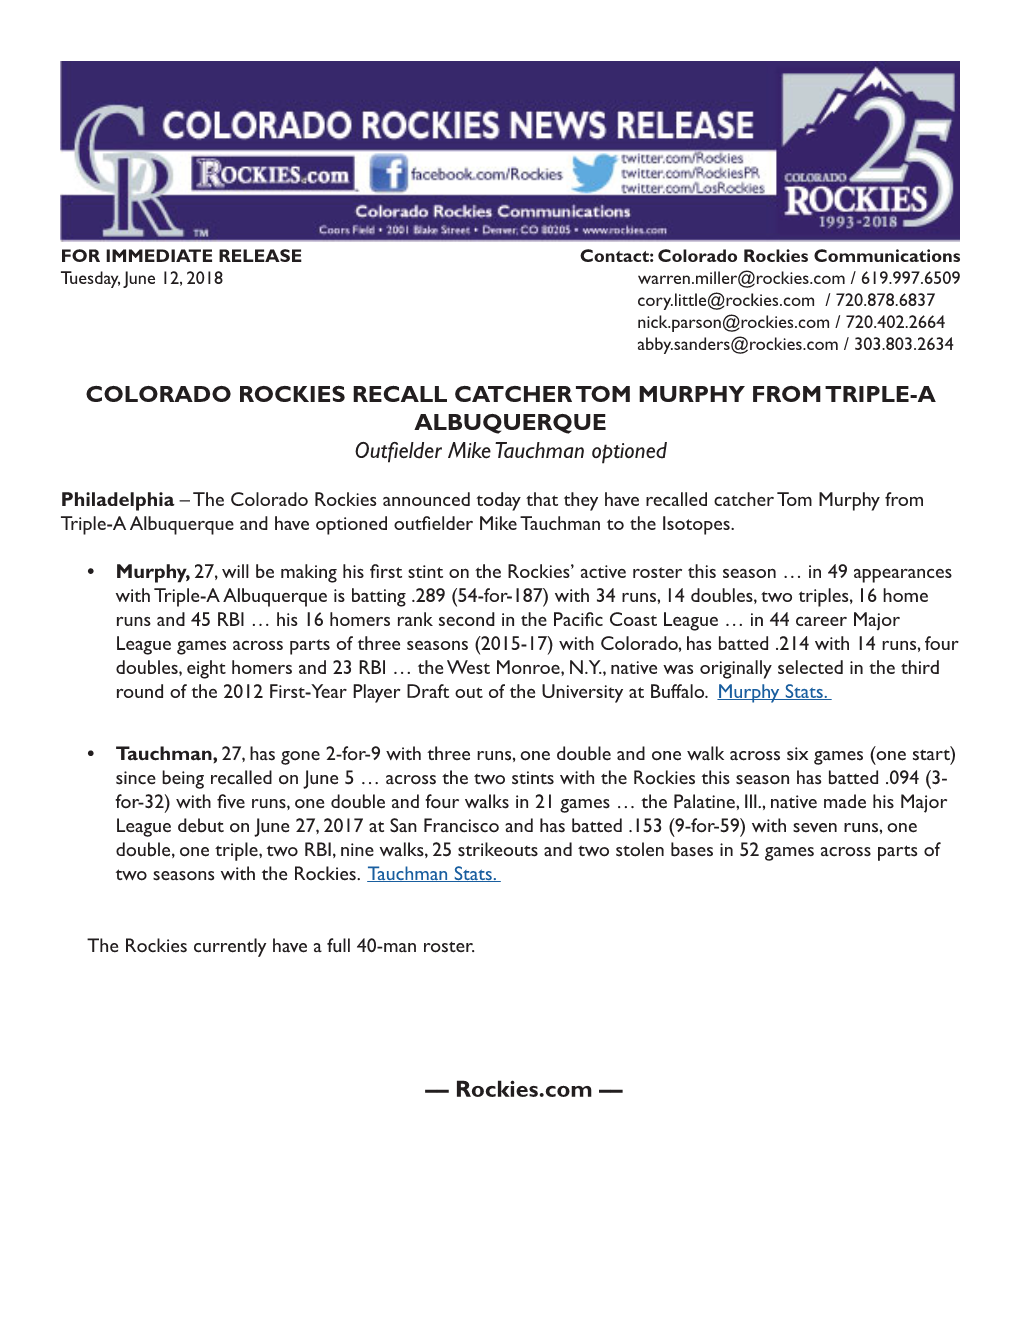 COLORADO ROCKIES RECALL CATCHER TOM MURPHY from TRIPLE-A ALBUQUERQUE Outfielder Mike Tauchman Optioned